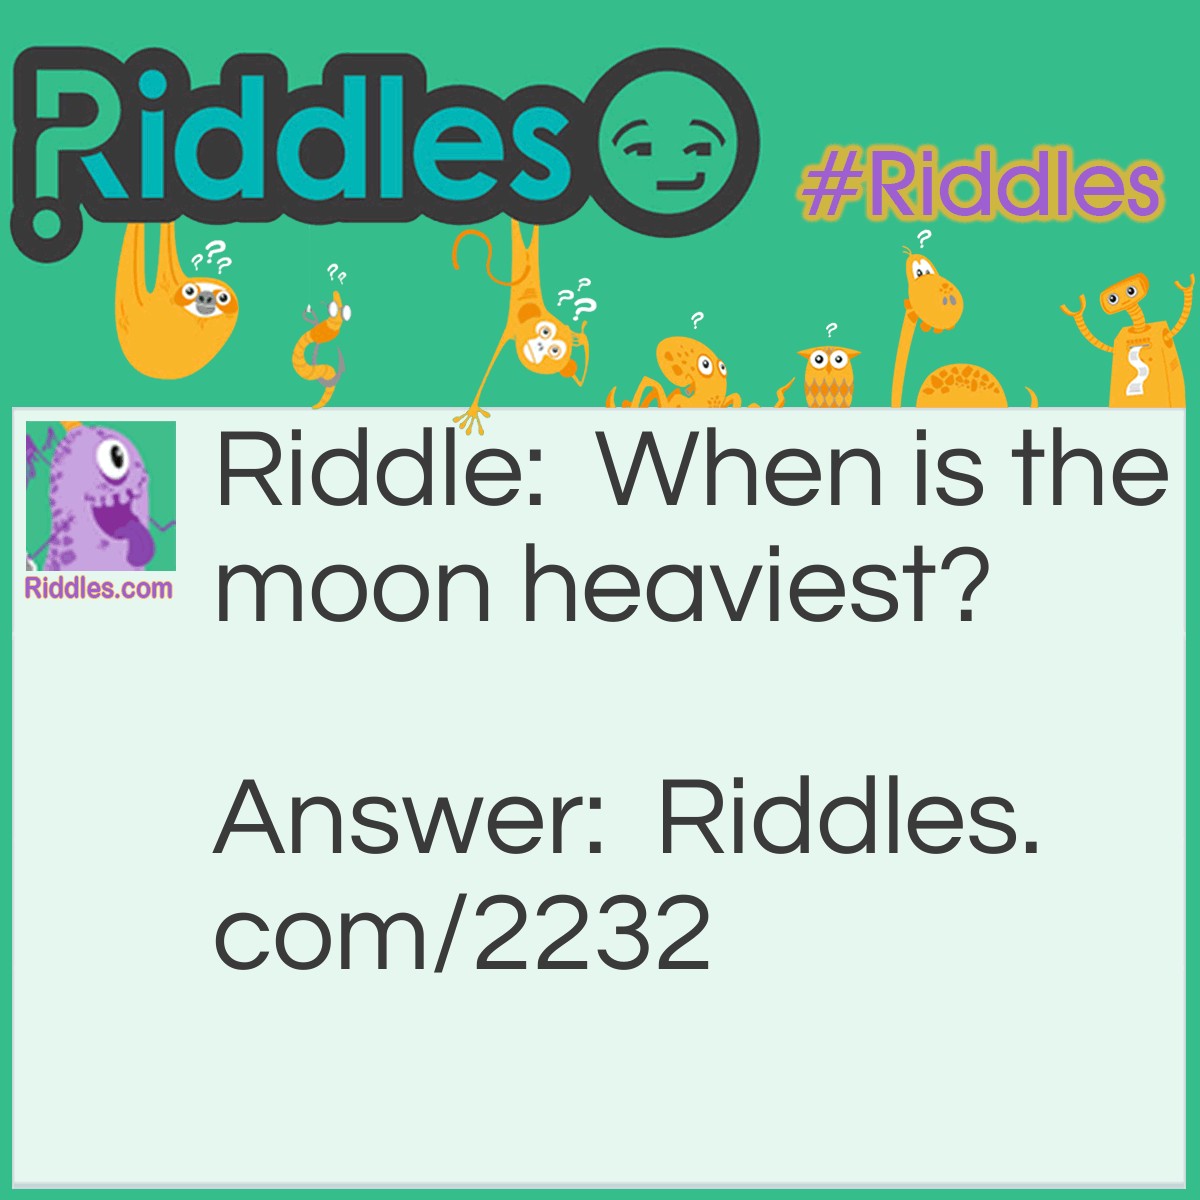 Riddle: When is the moon heaviest? Answer: When it is full.